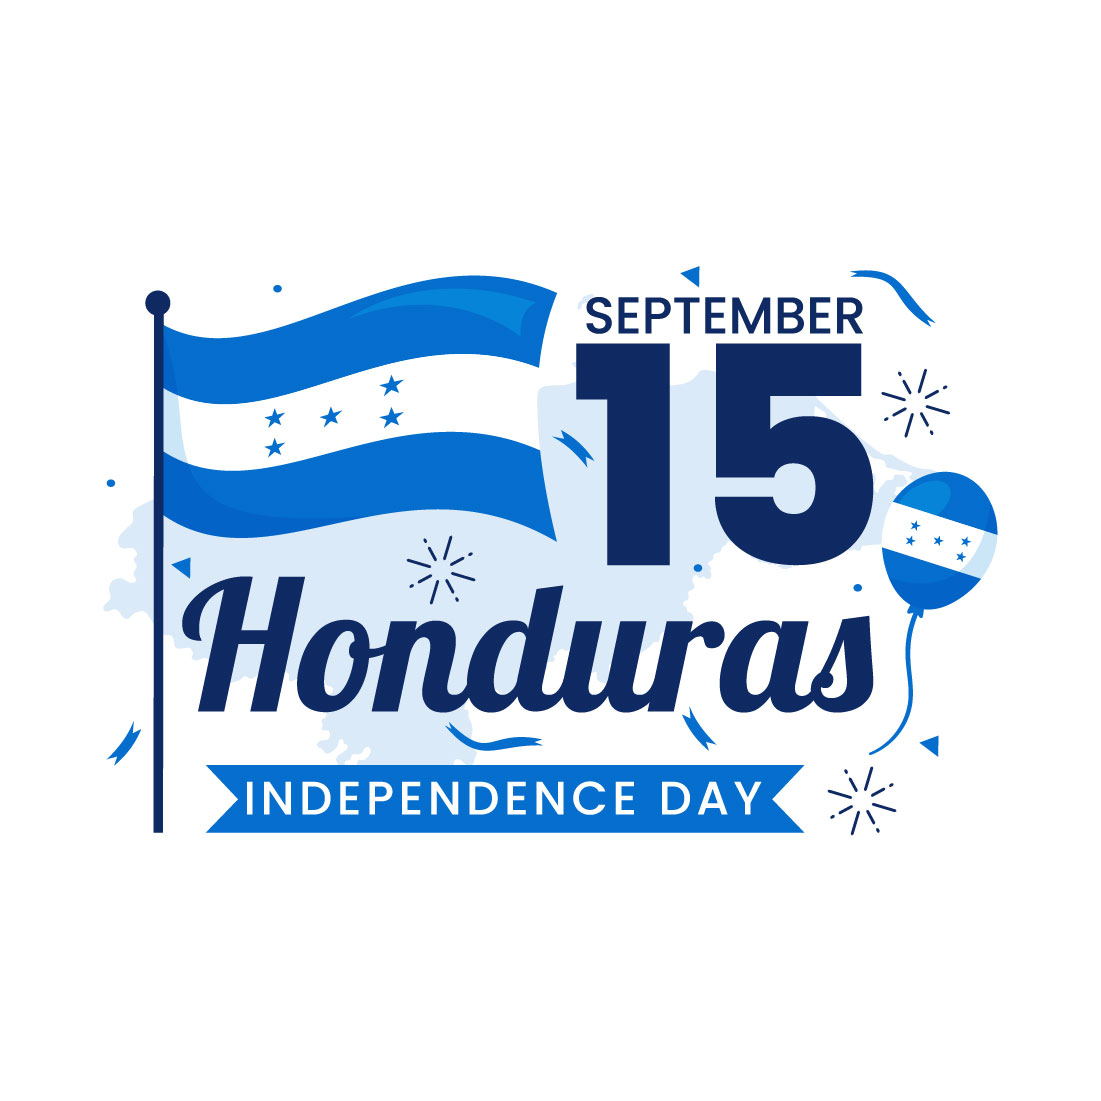 13 Honduras Independence Day Illustration cover image.